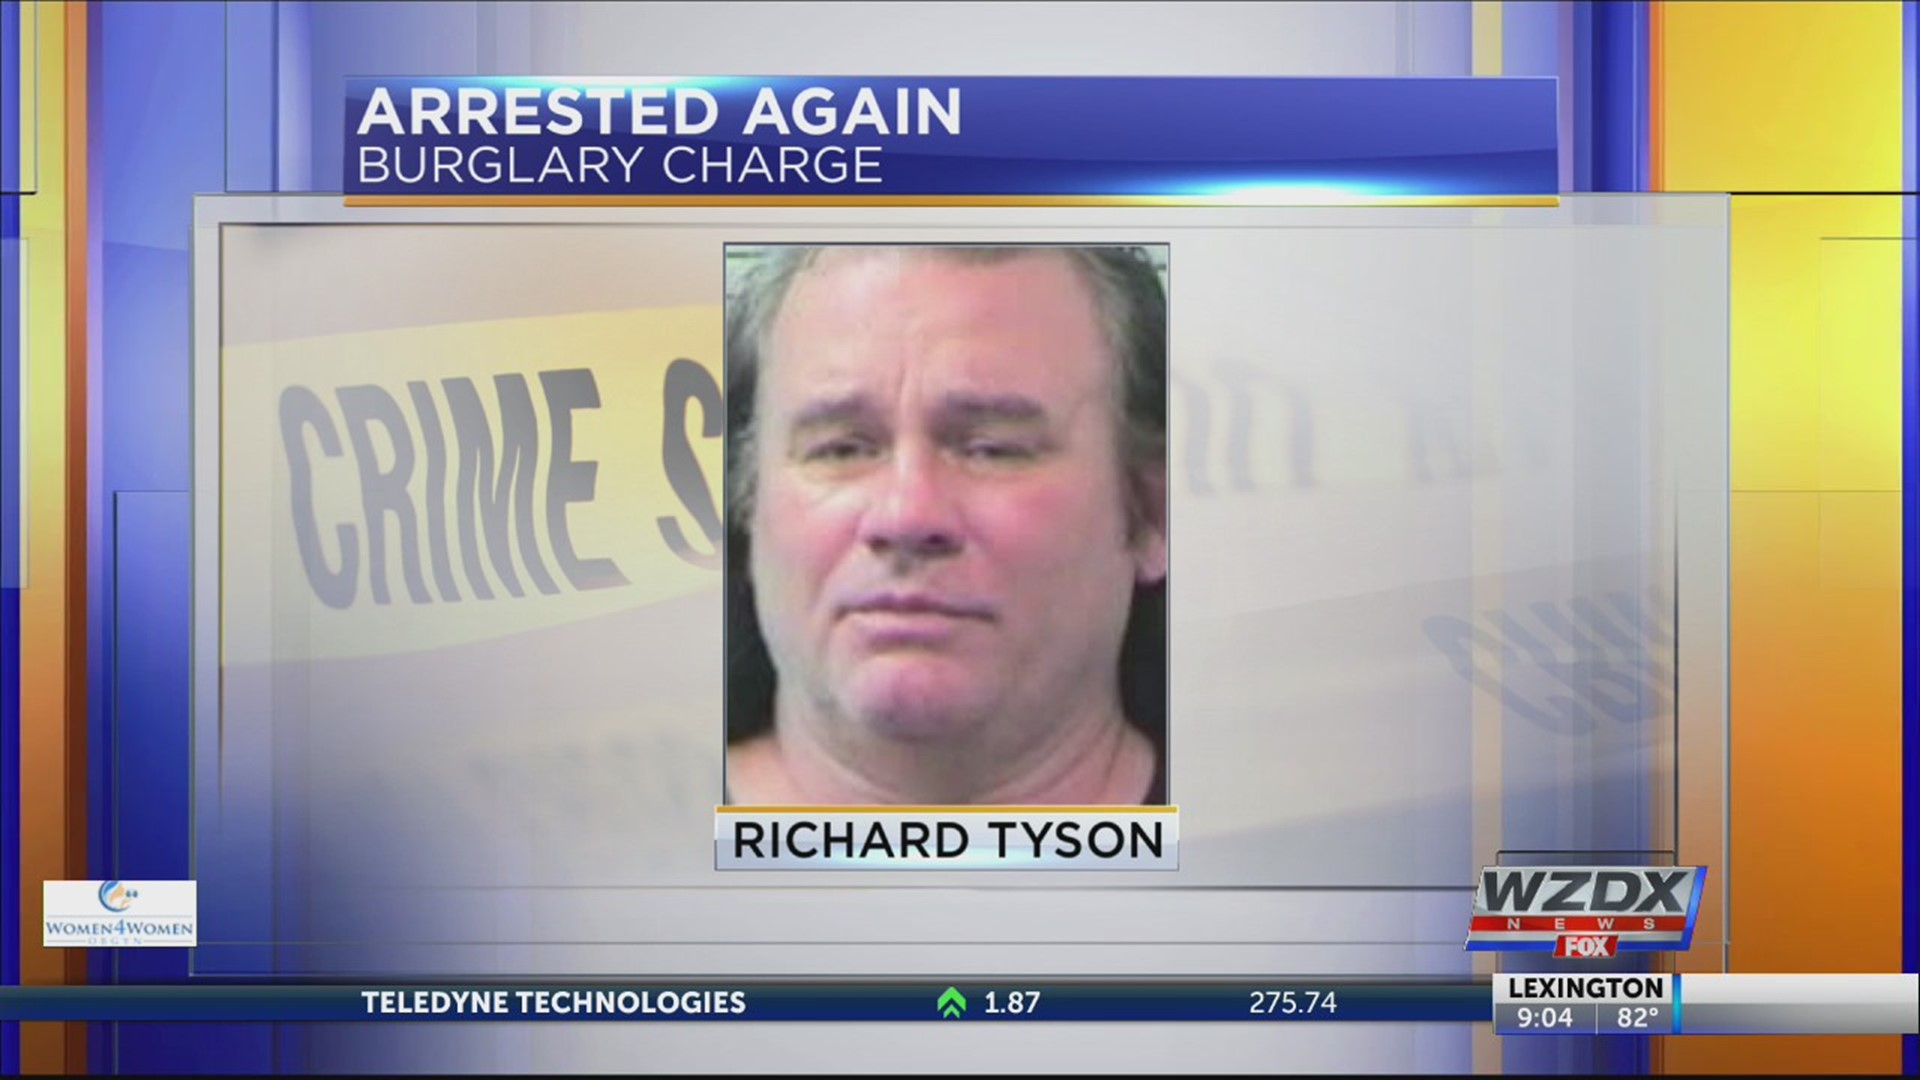 Mobile native and movie actor Richard Tyson was arrested for the second time in the past two weeks.